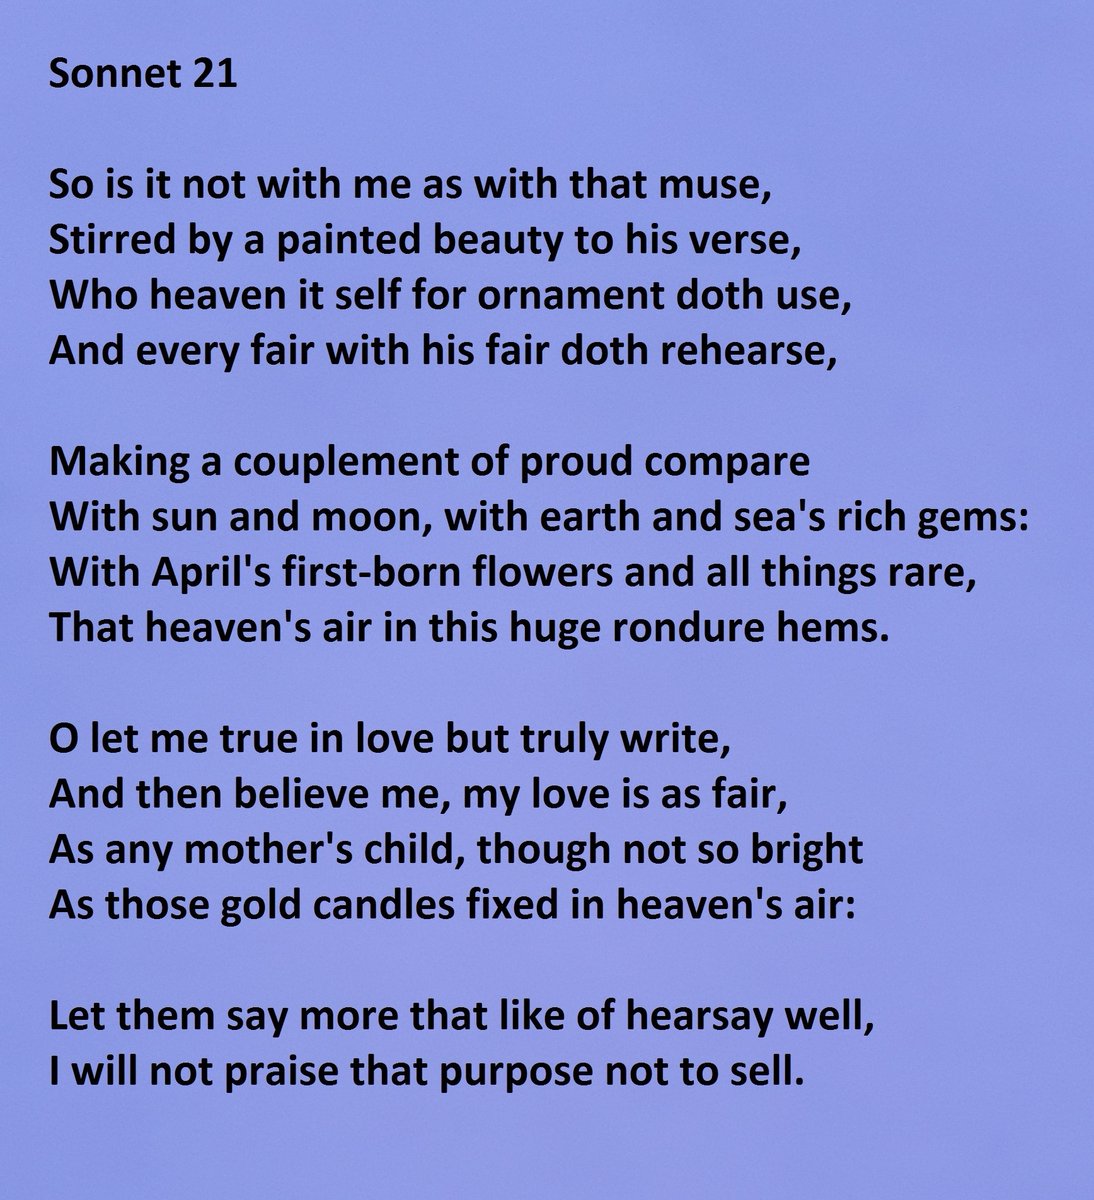 Sonnet 21 by William Shakespeare "So is it not with me as with that muse"